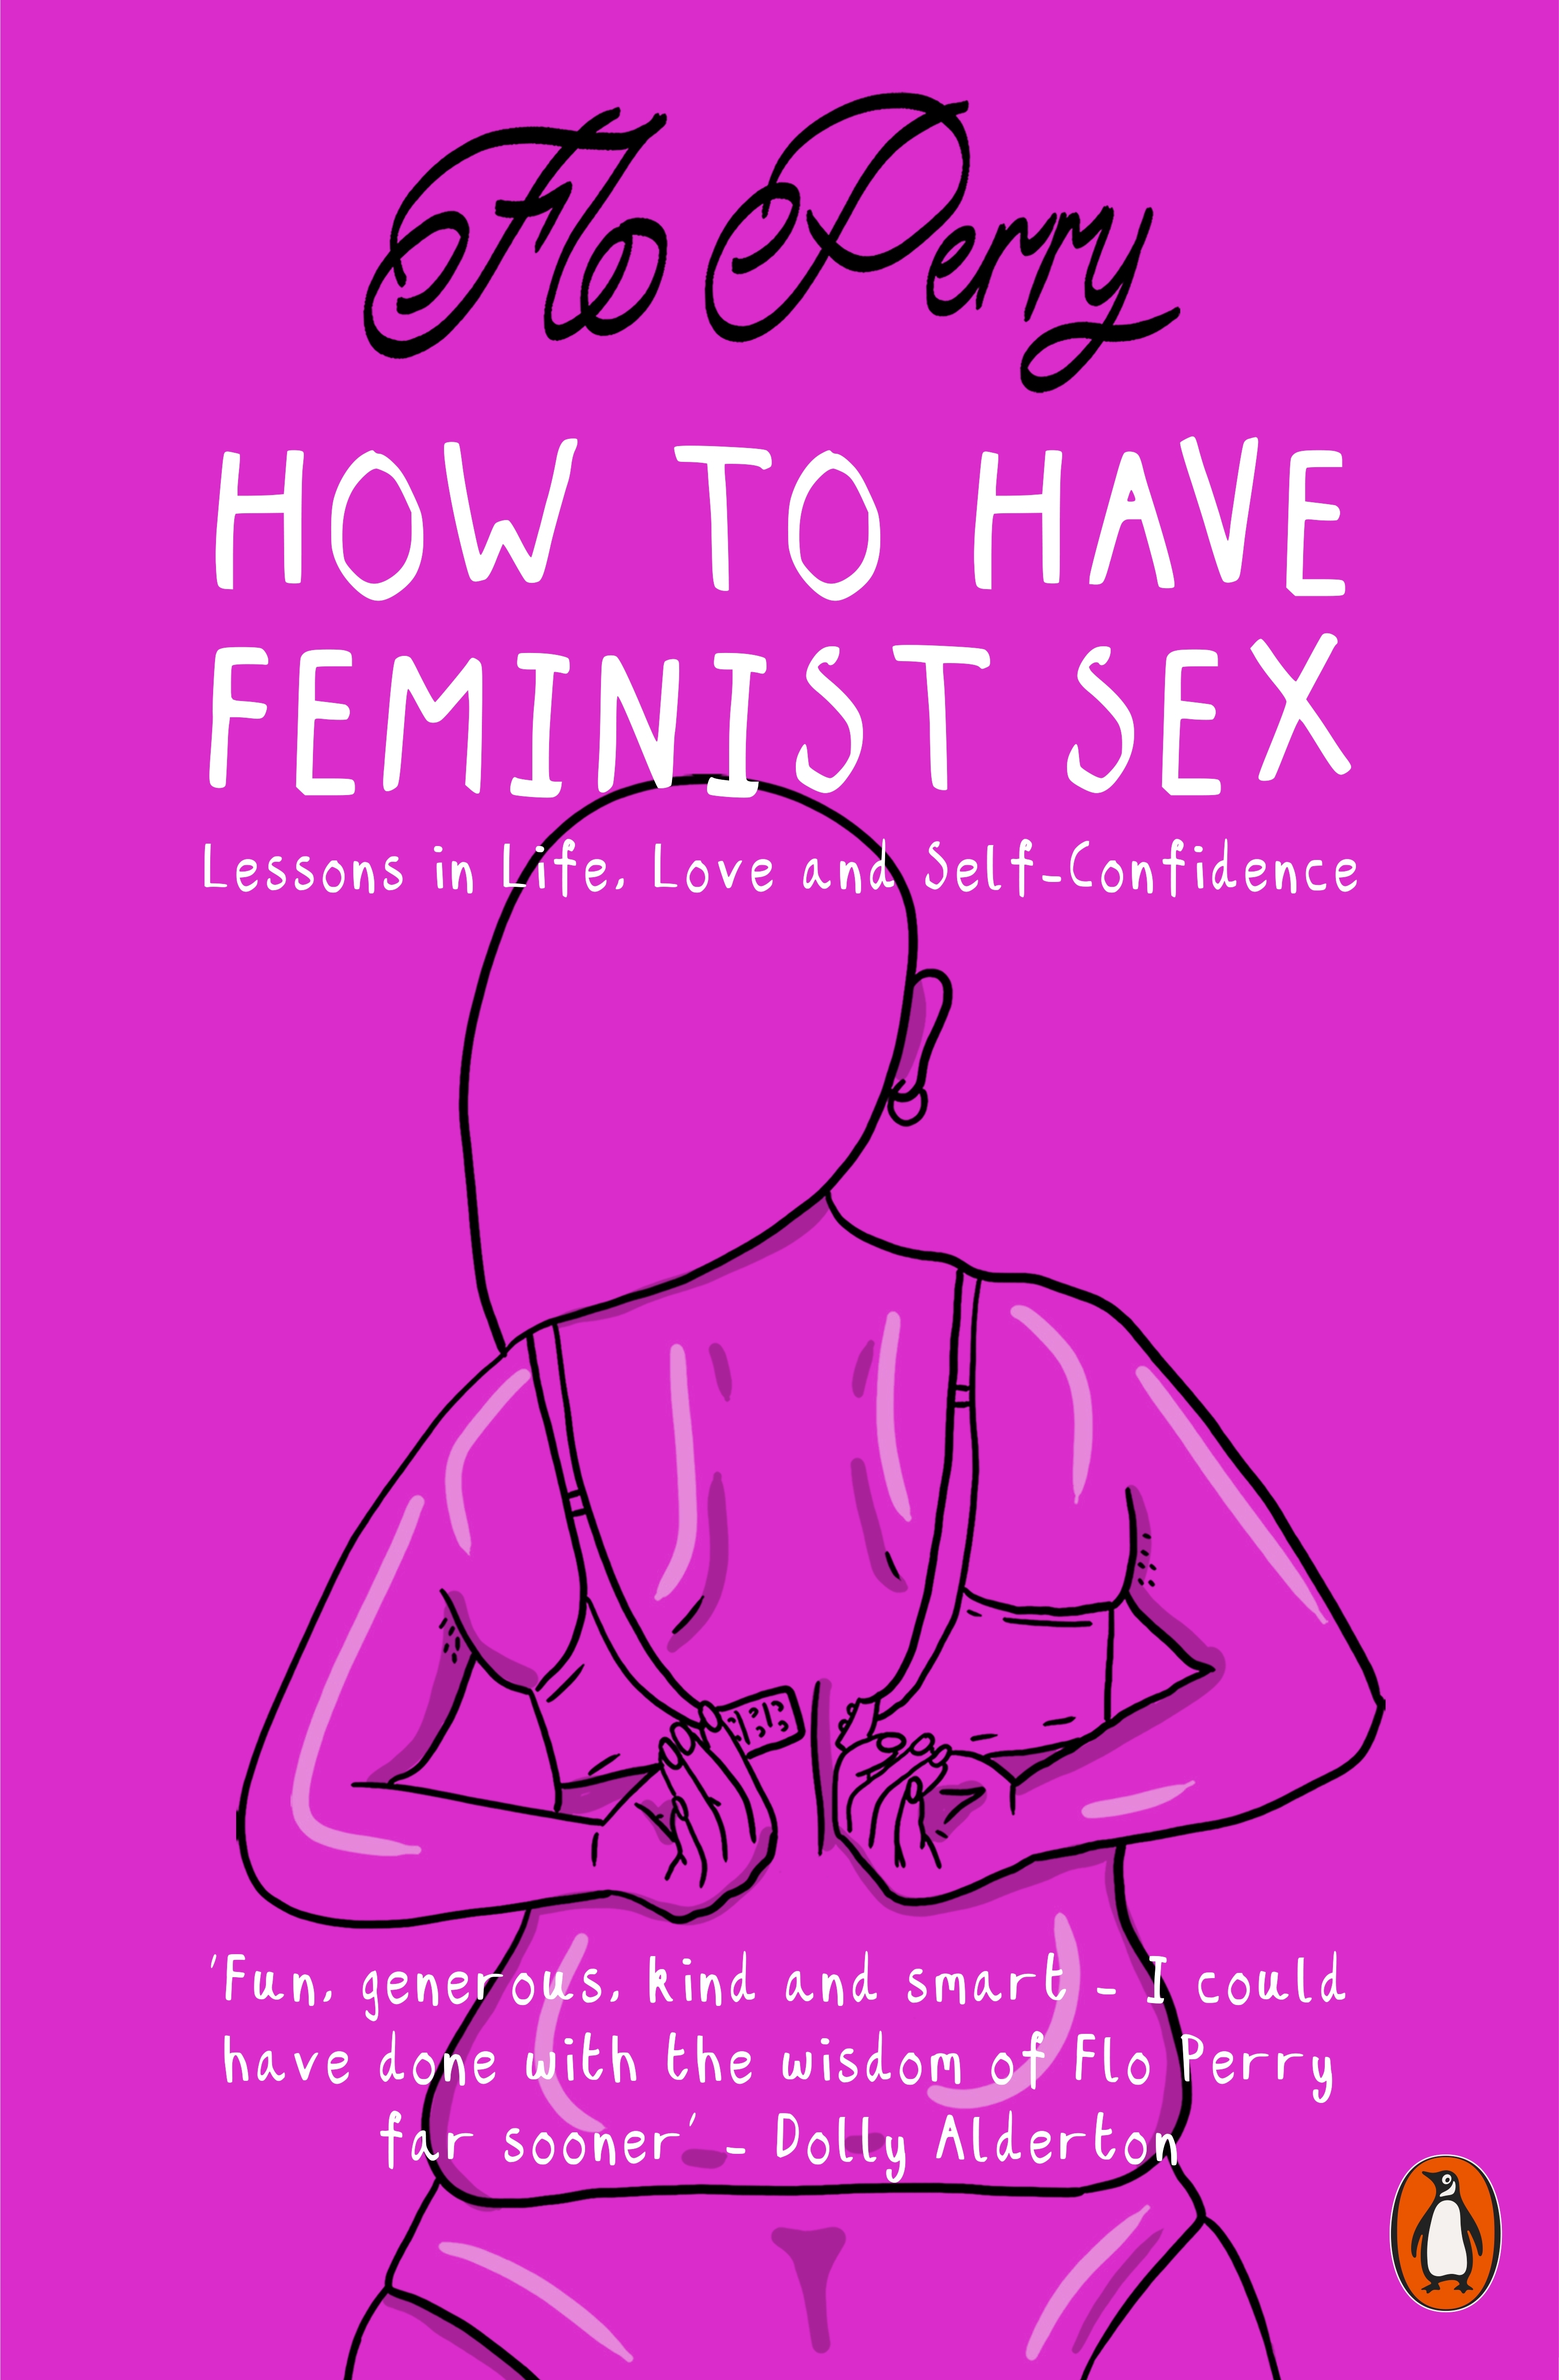 How To Have Feminist Sex By Flo Perry Penguin Books Australia